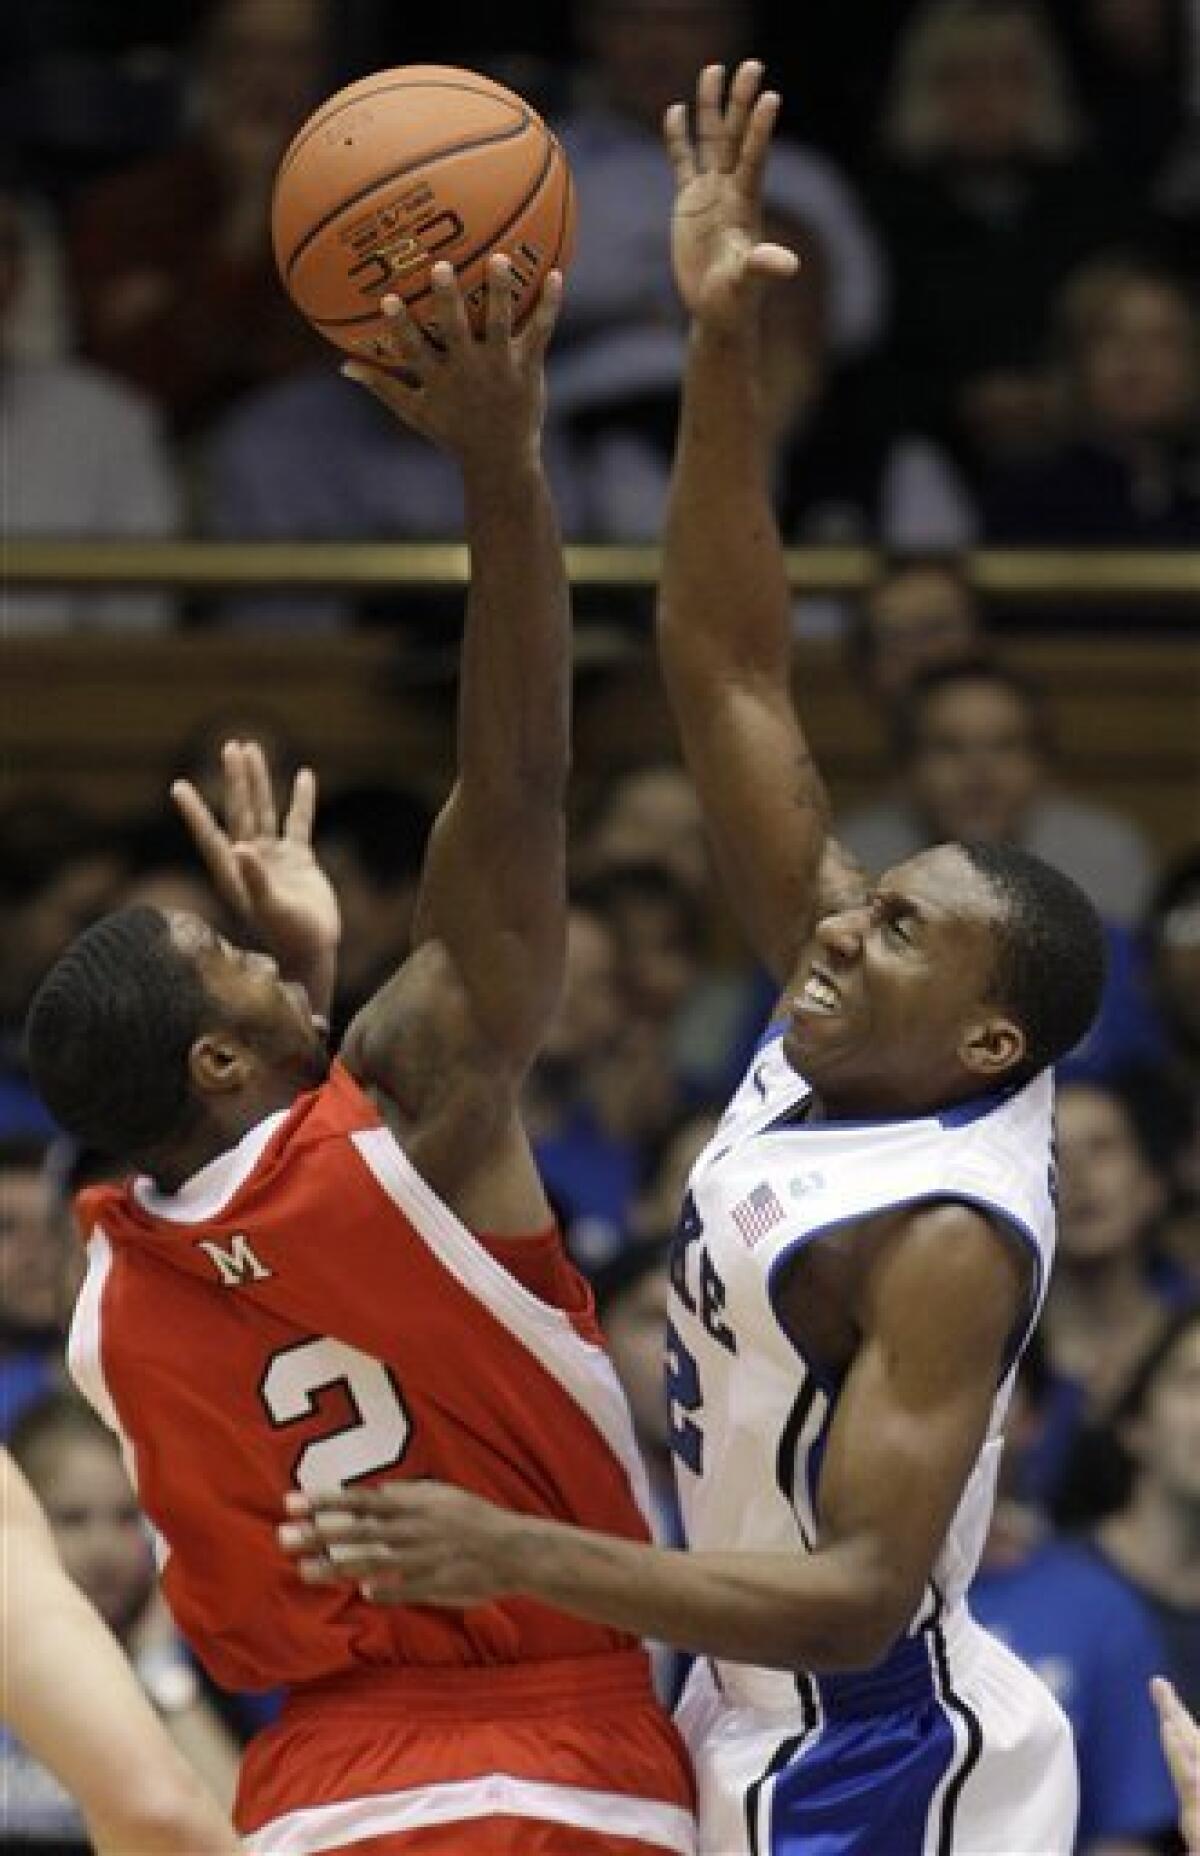 Curry leads No. 1 Duke to 79-45 rout of RedHawks